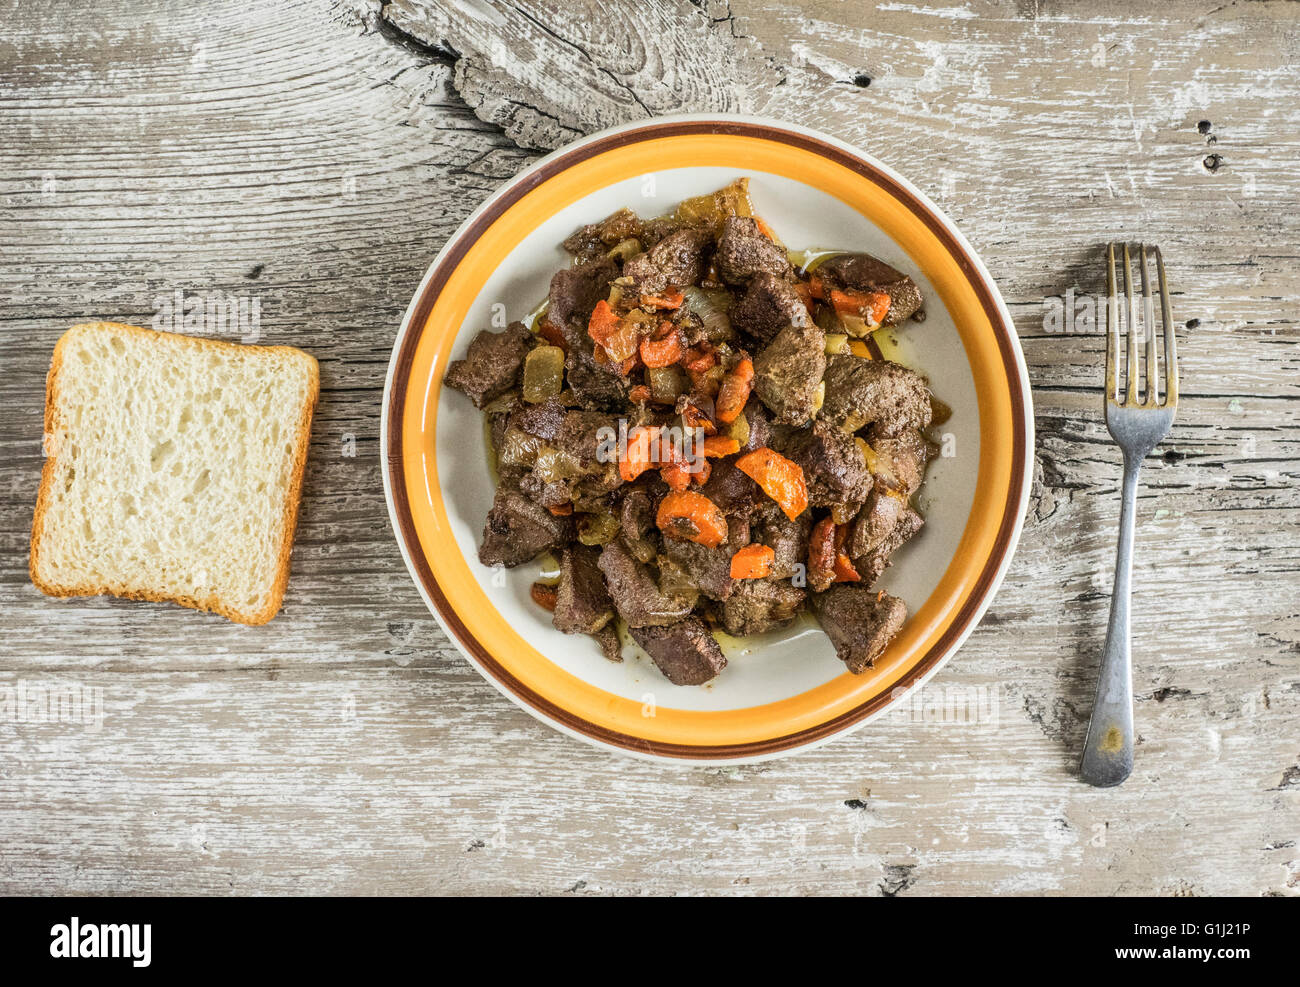 Plate of fried pork liver with slice of bread Stock Photo